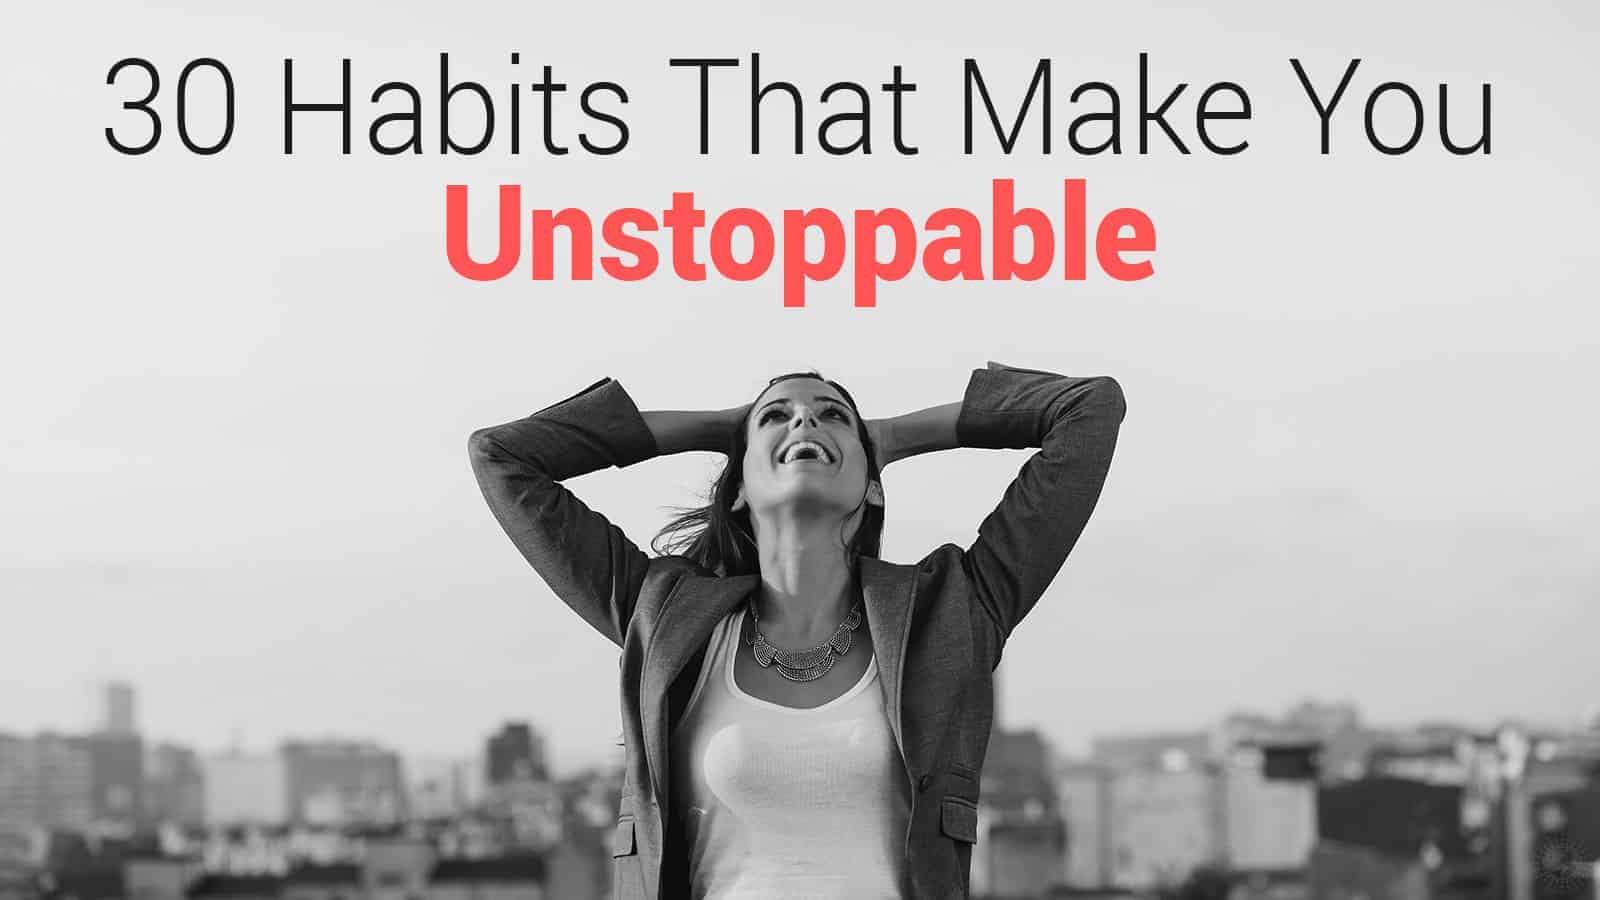 30 Habits That Make You Unstoppable